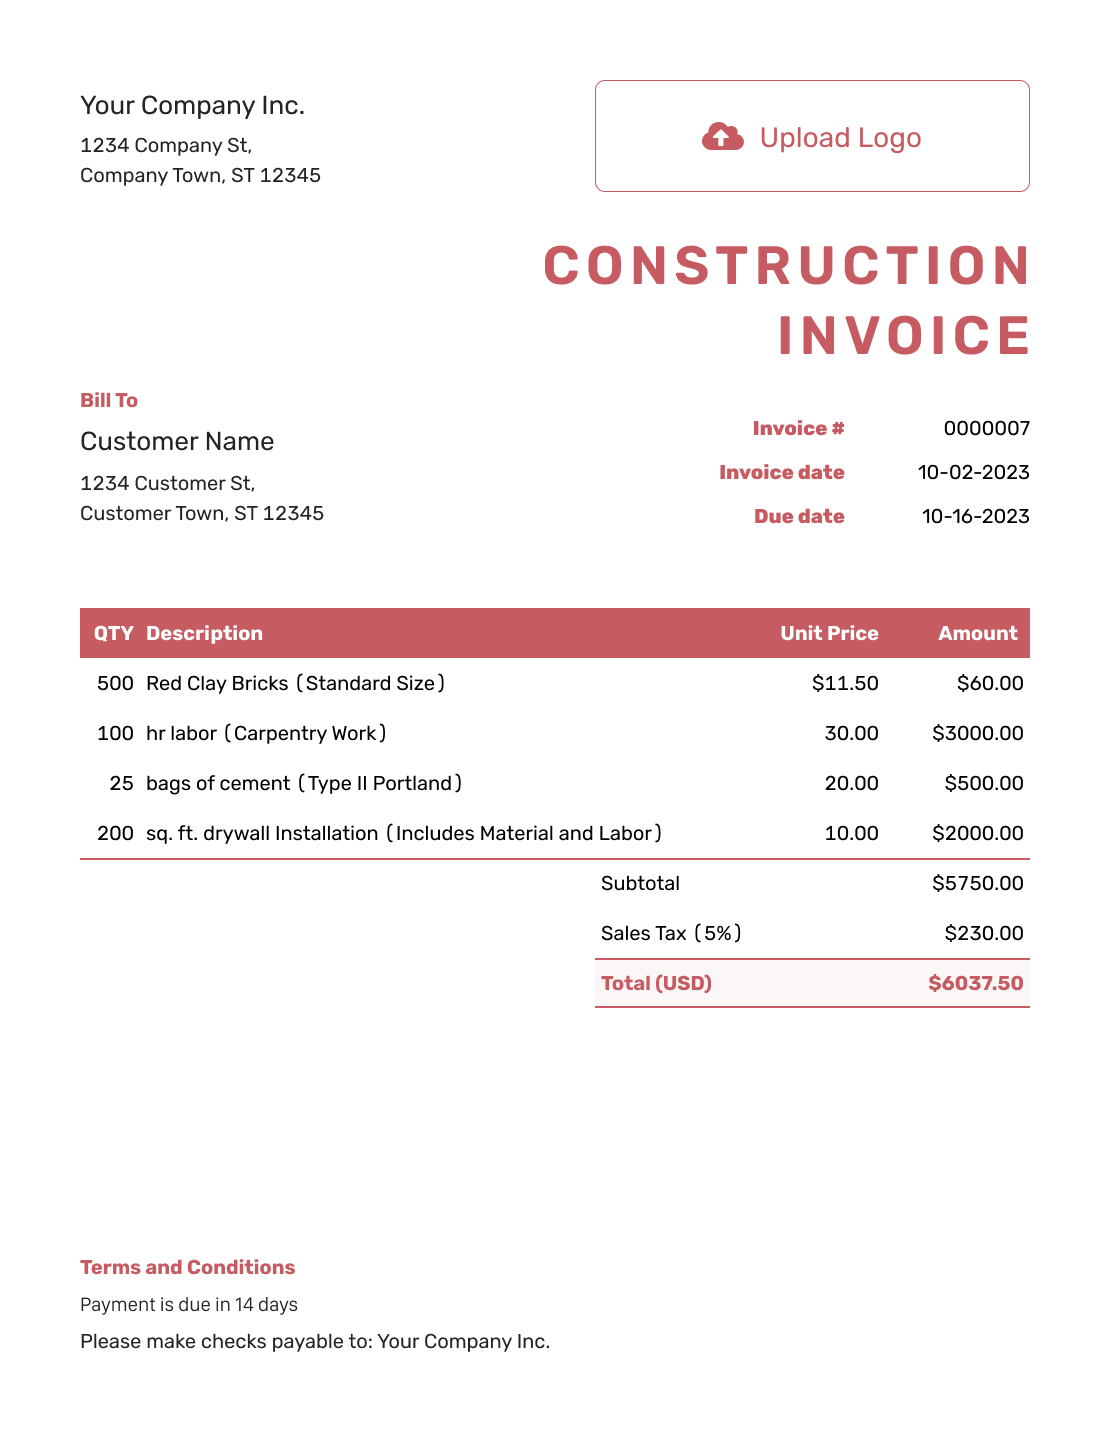 Itemized Construction Invoice Template